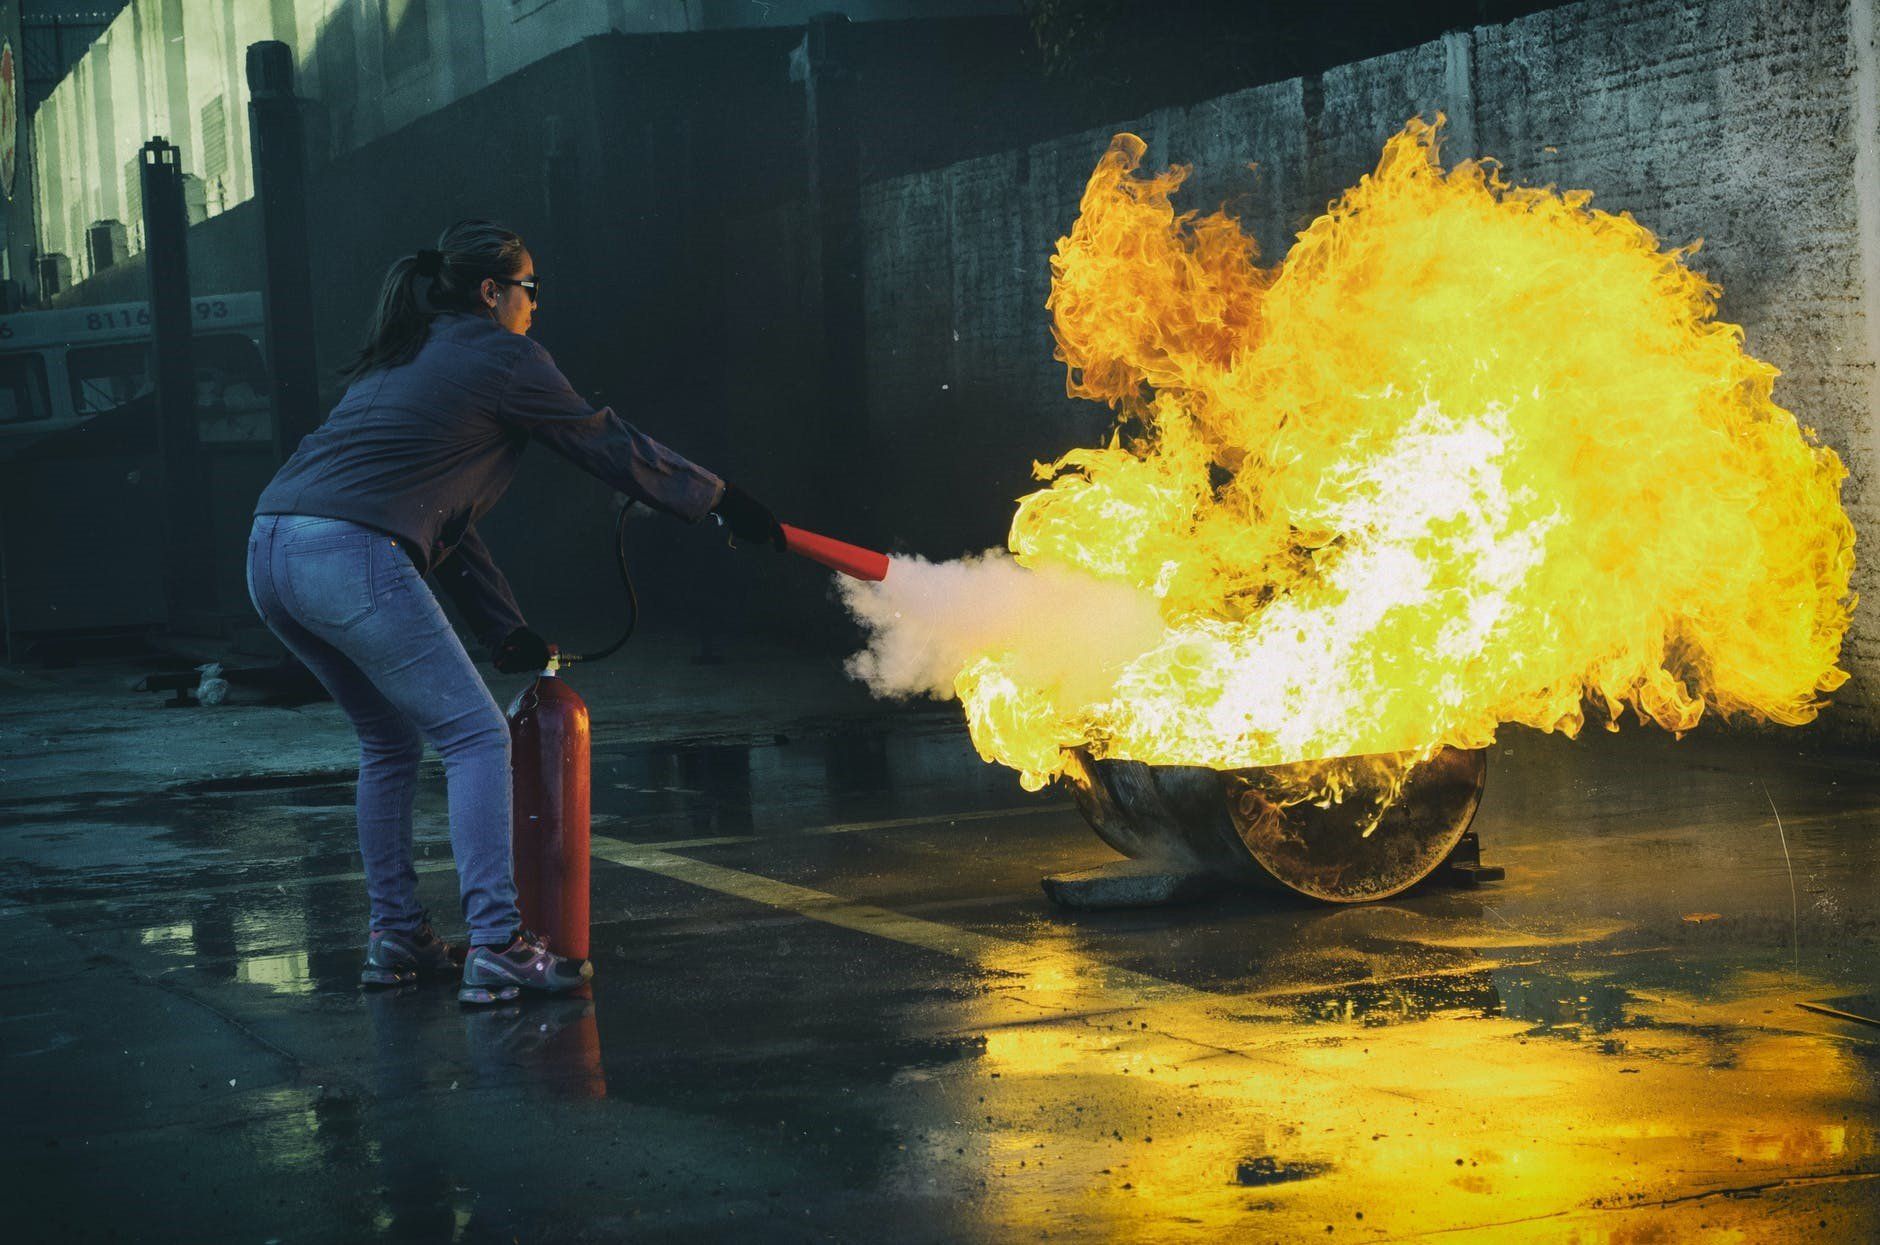 Woman putting out fire